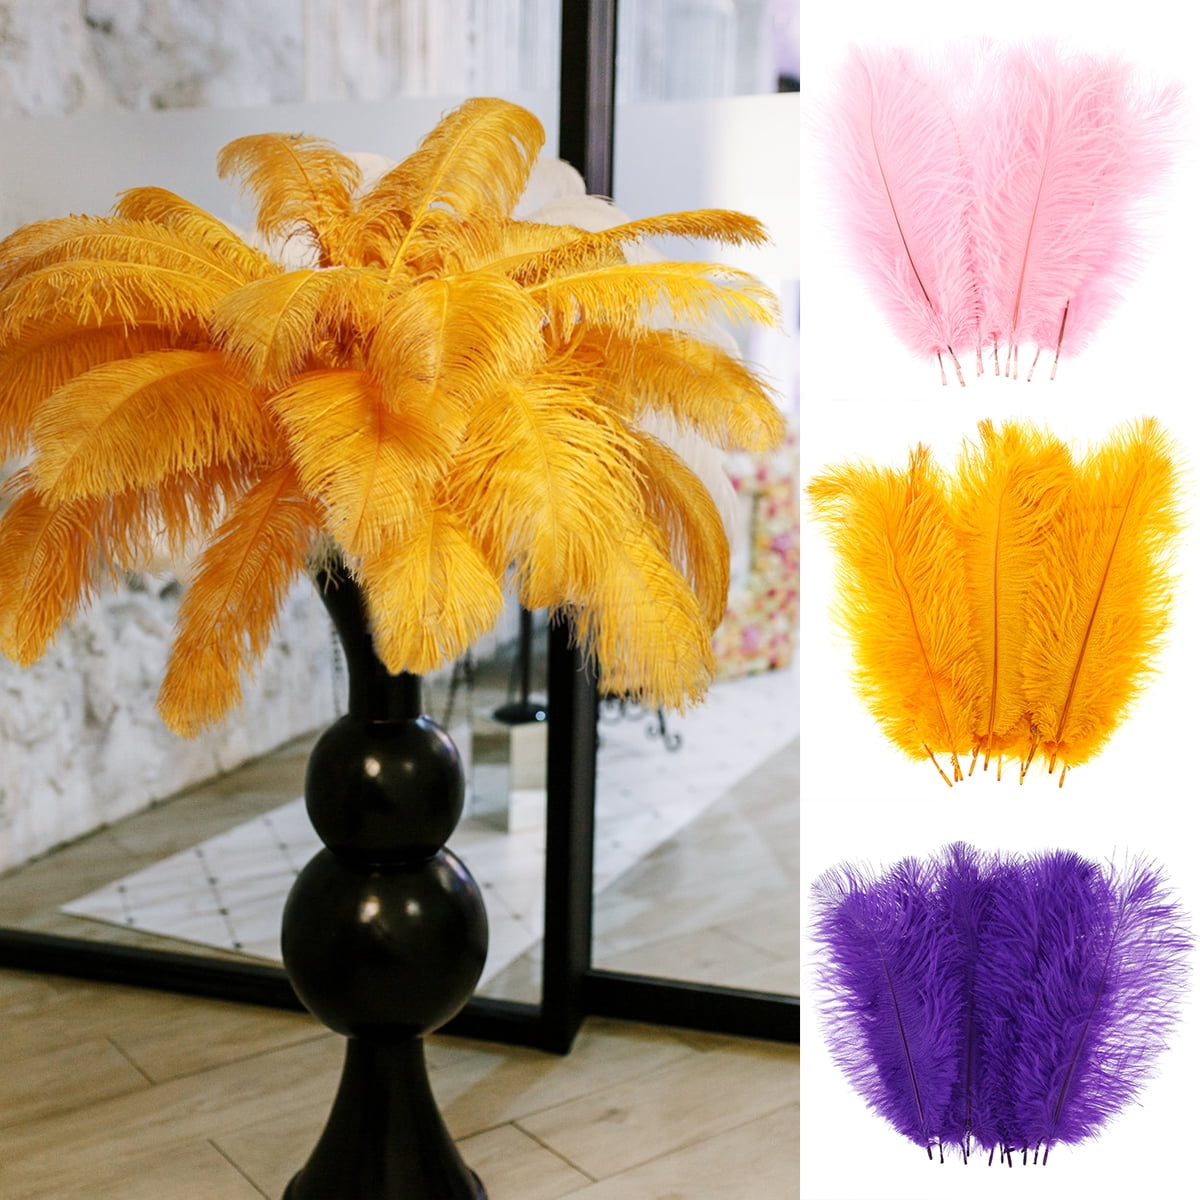 10pcs 16-18 Long Natural Peacock Feathers for Tall Vases Home Decorations Christmas Decor (10)